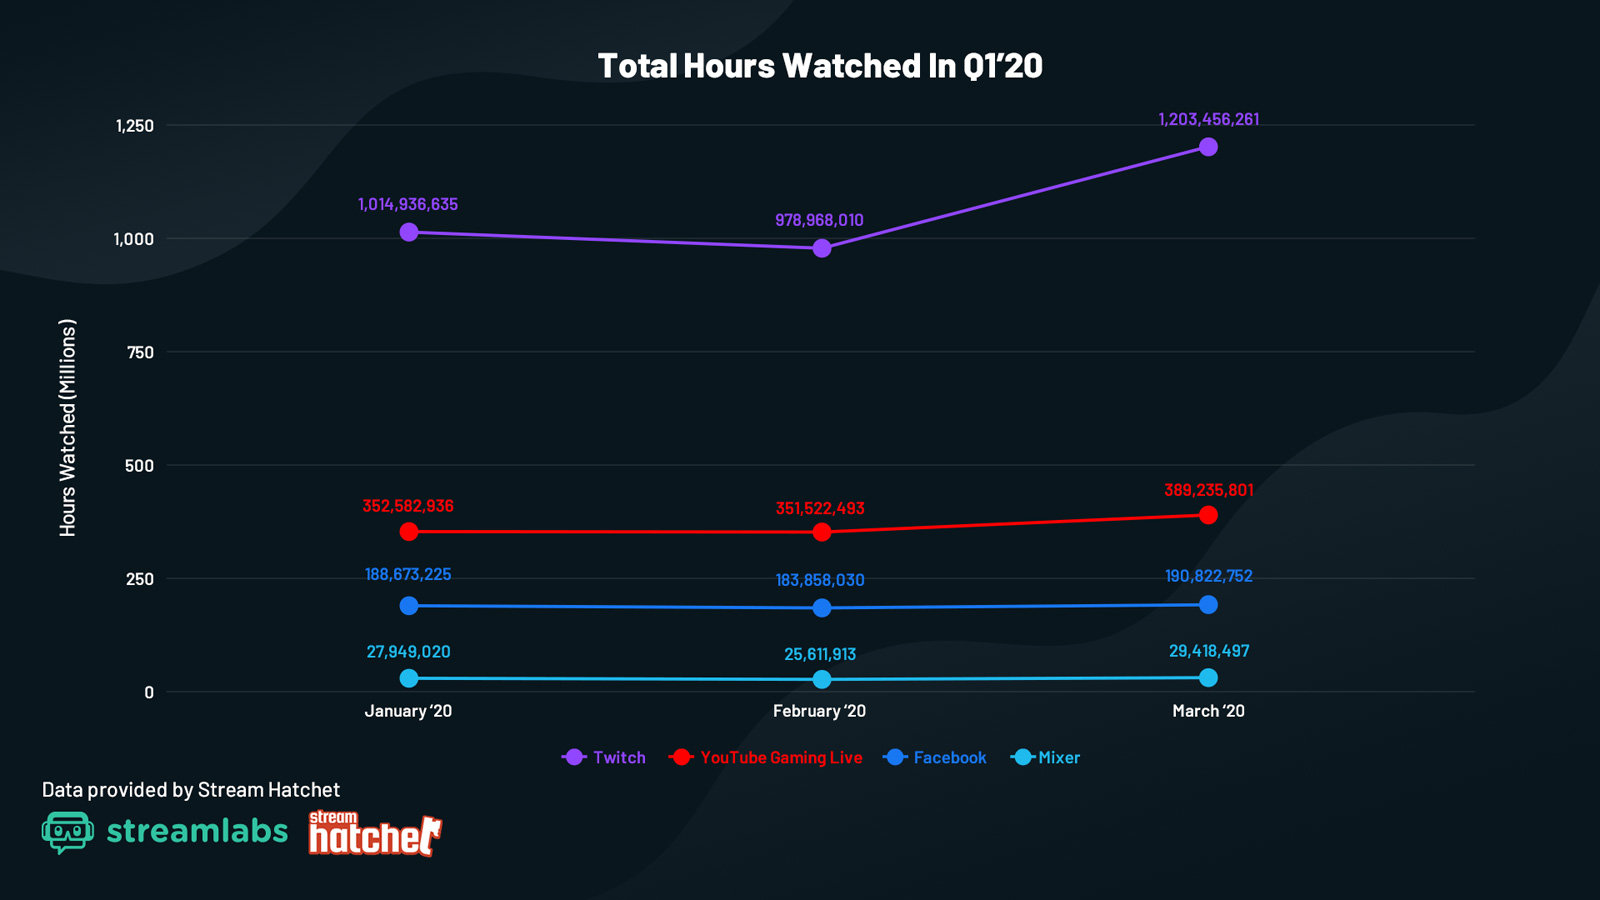 Livestreaming service hours watched Q1 2020